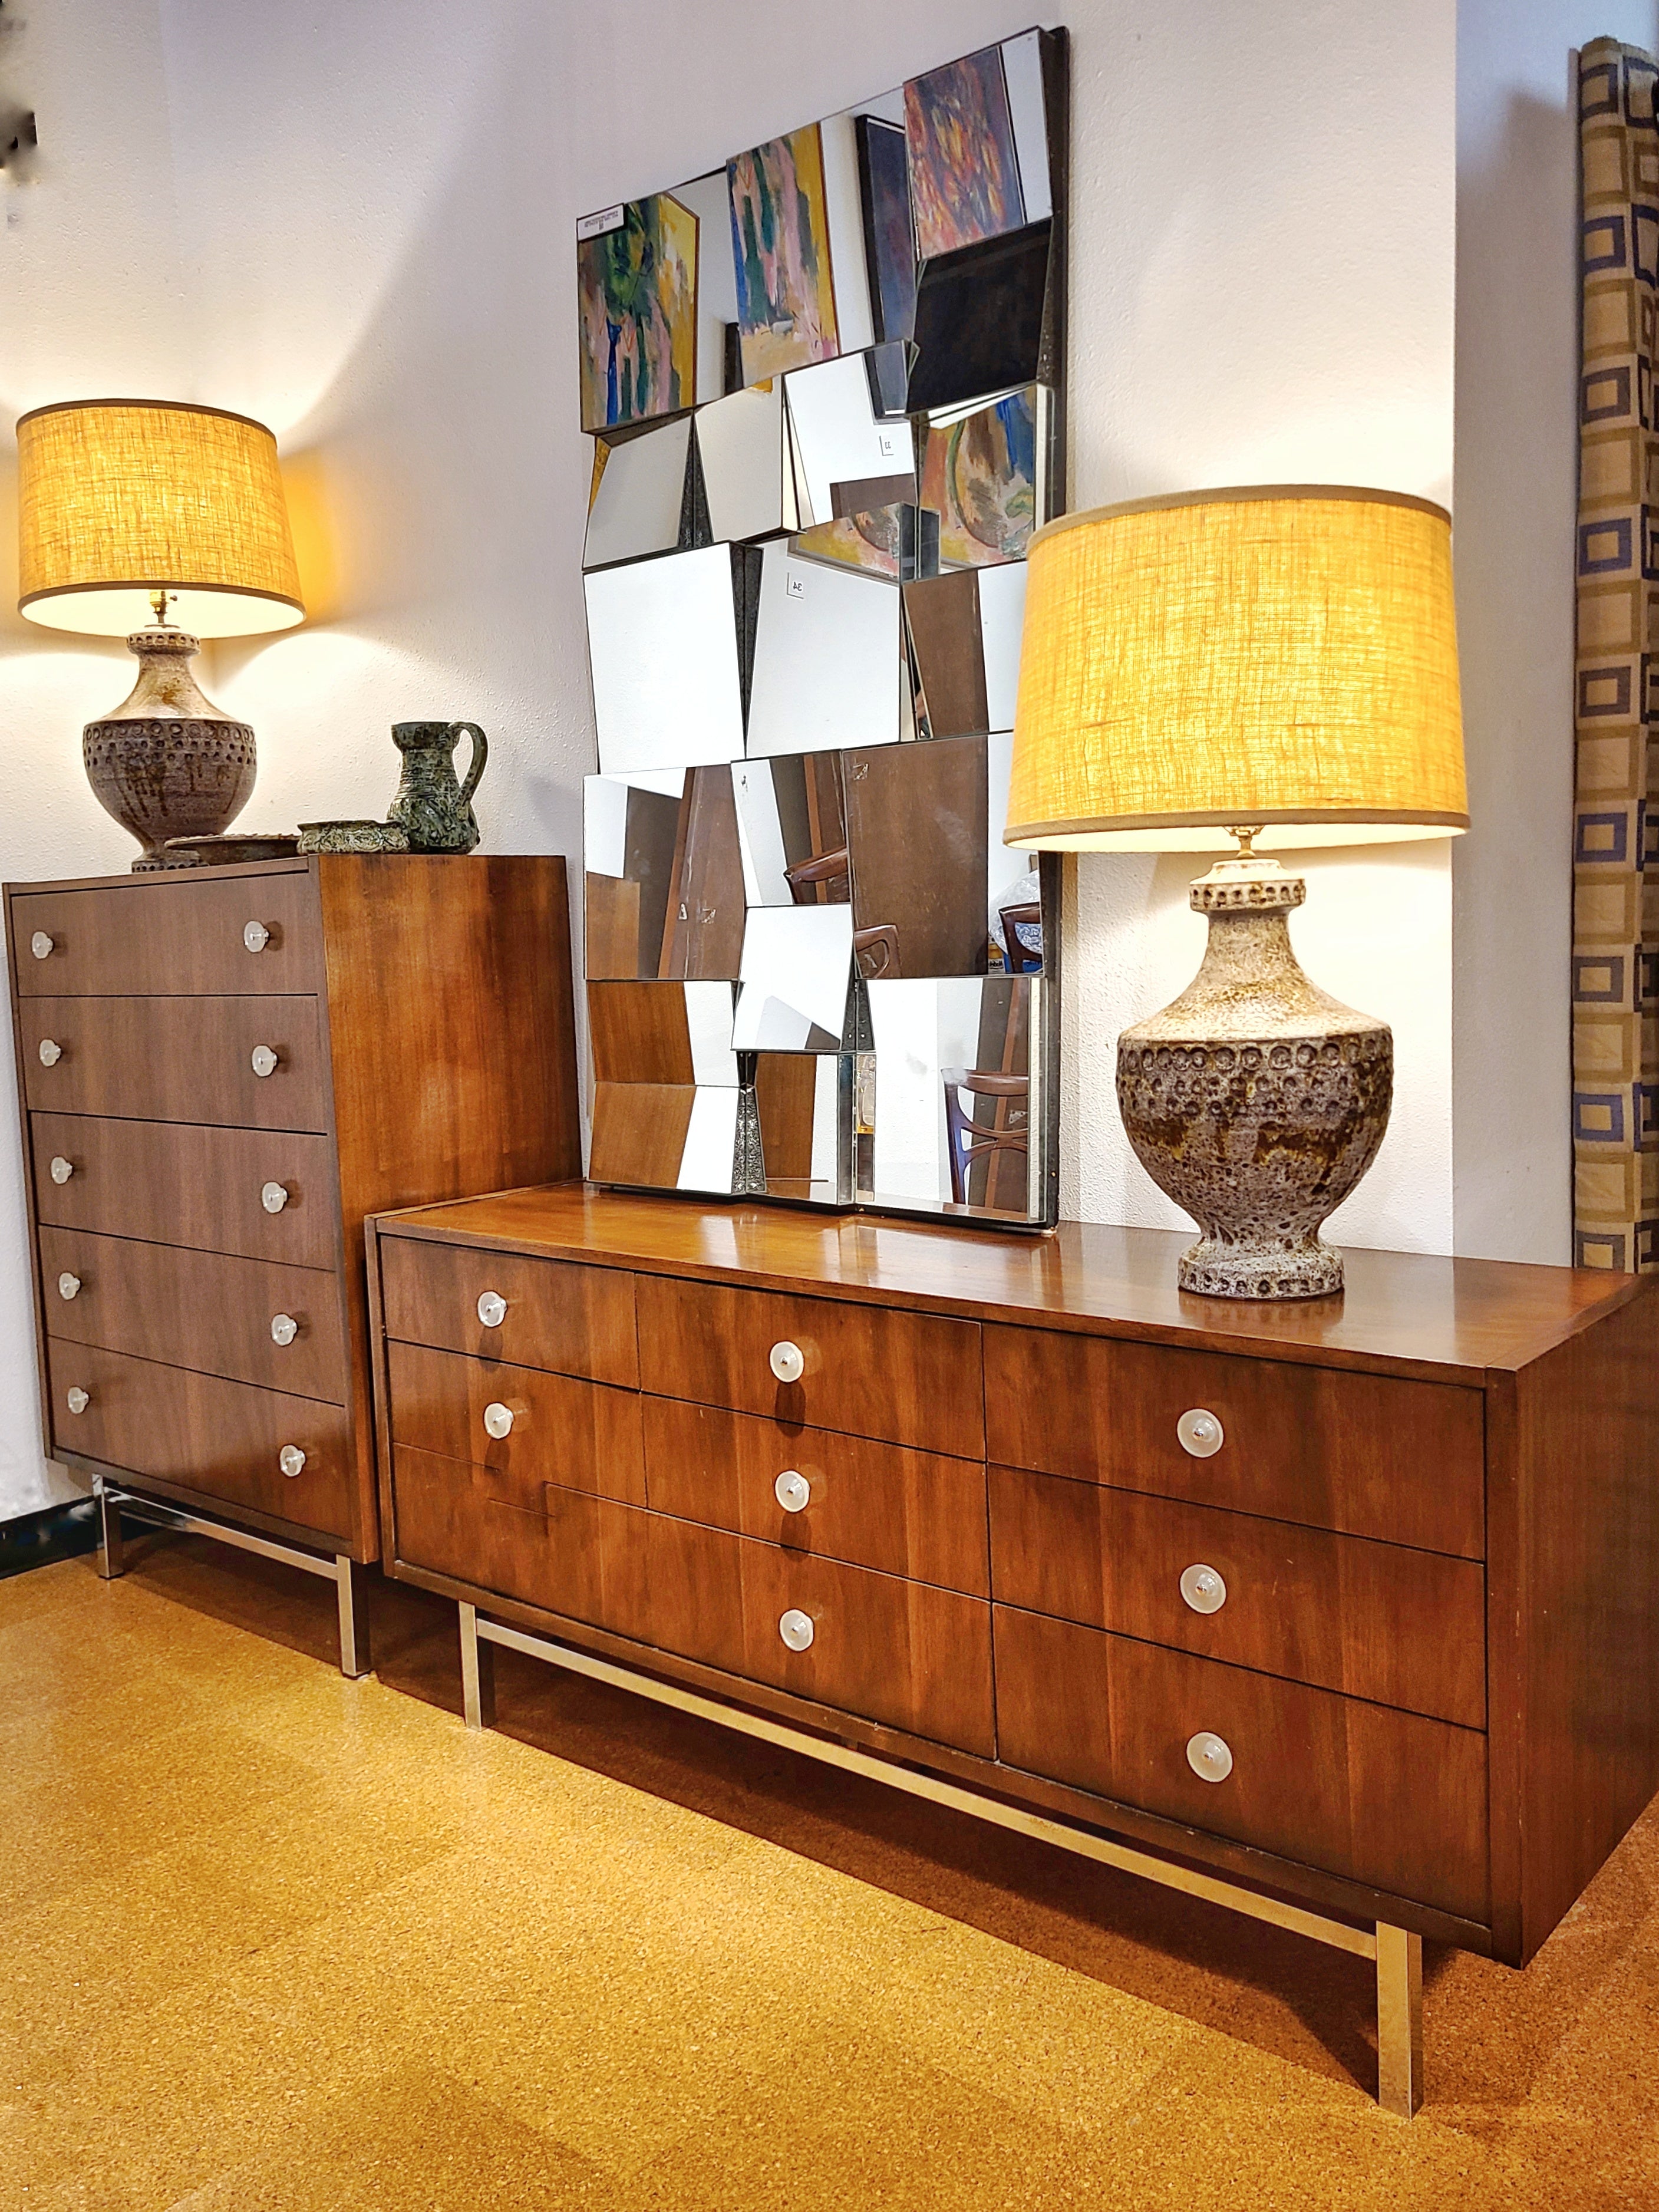 LOW WALNUT NINE-DRAWER DRESSER WITH LUCITE PULLS AND CHROME BASE